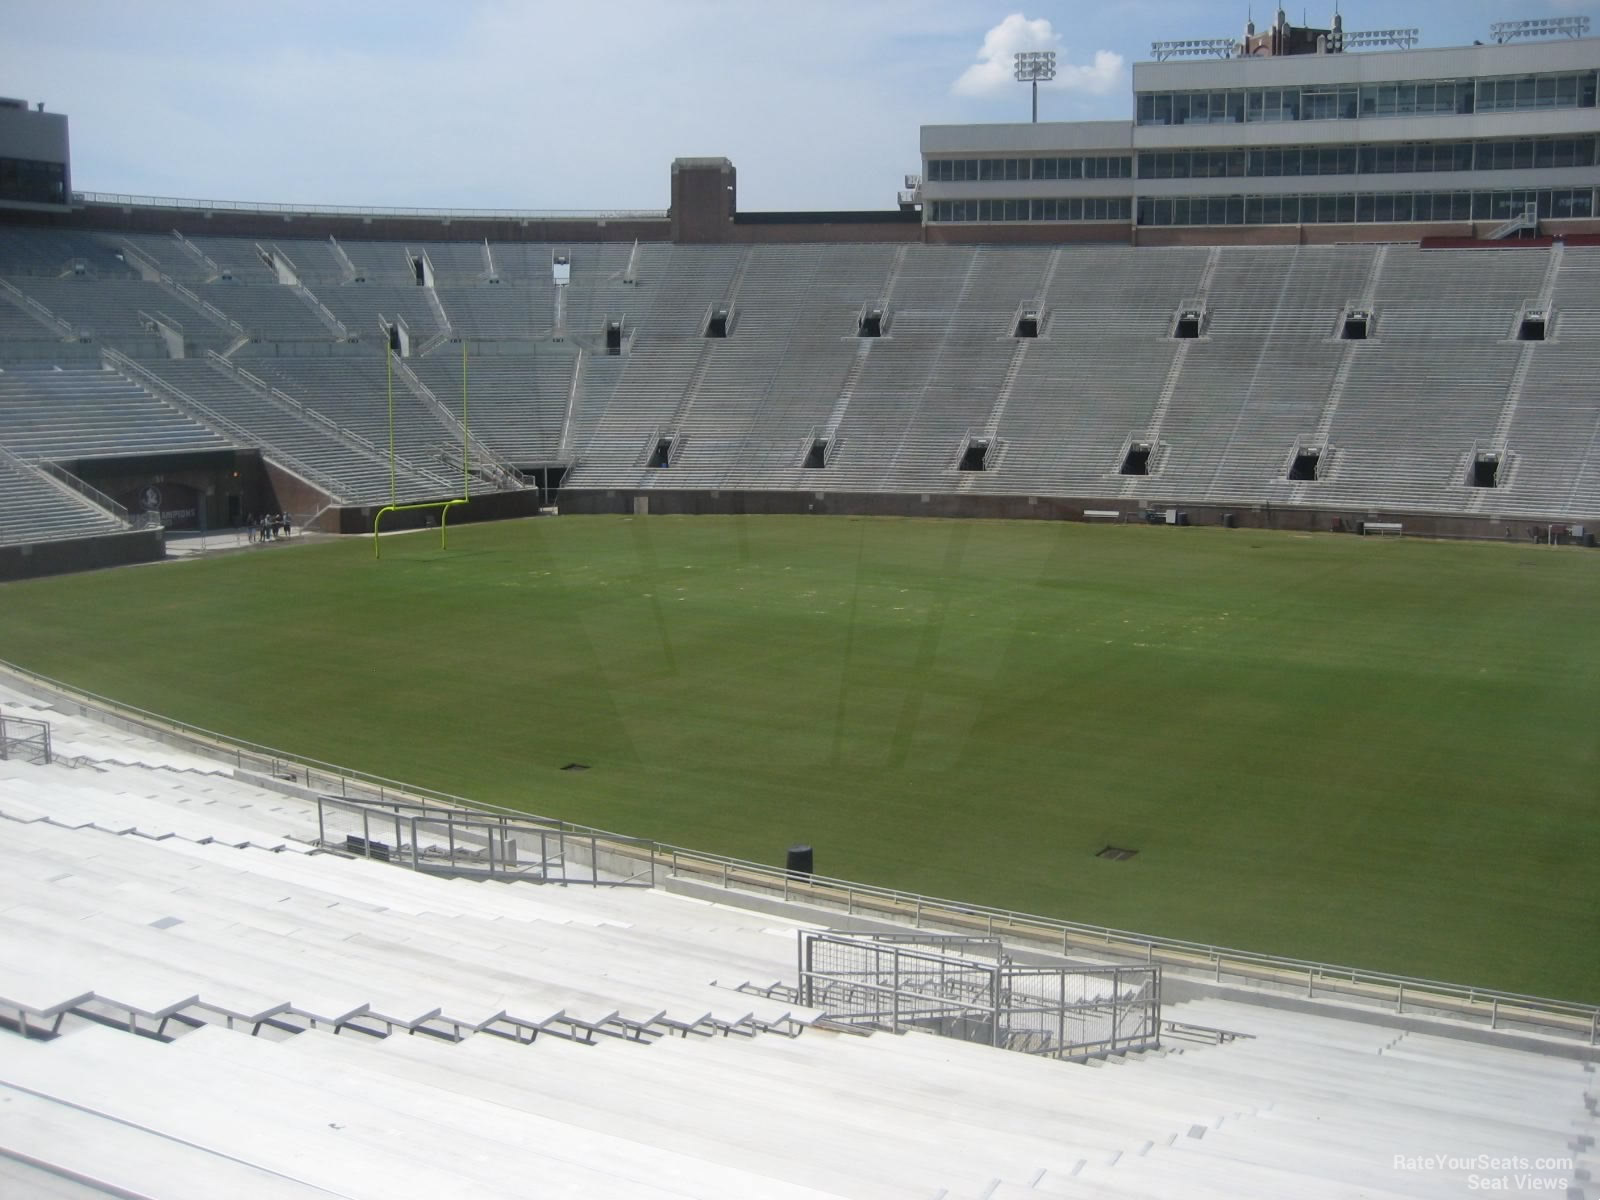 section 9, row 41 seat view  - doak campbell stadium